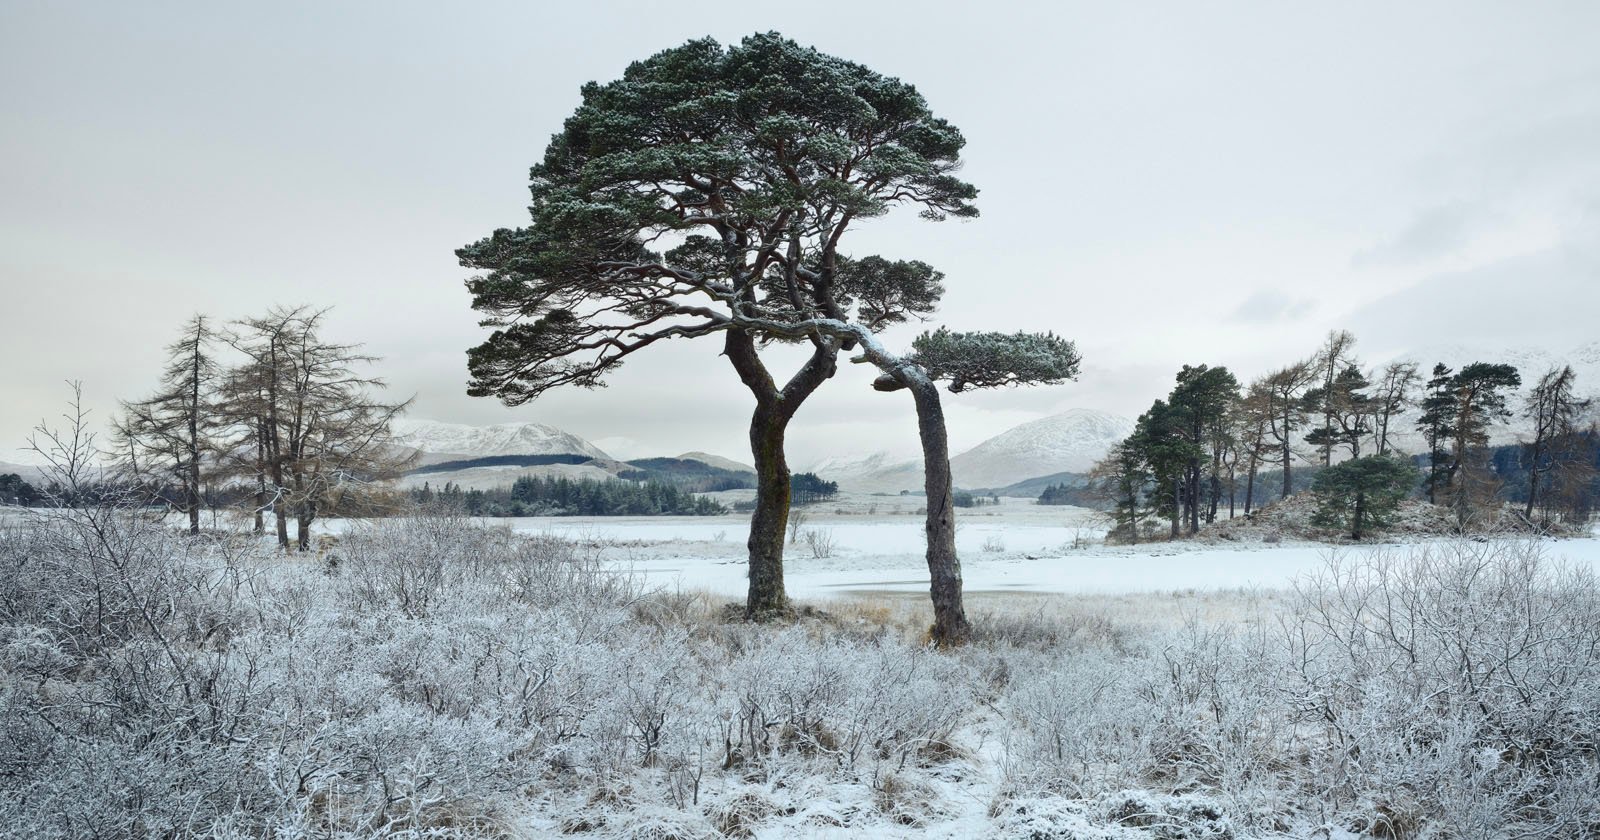 Ancient Pines by Loch Tulla, near the Bridge of Orchy, Central Highlands, Scotland, December 2012